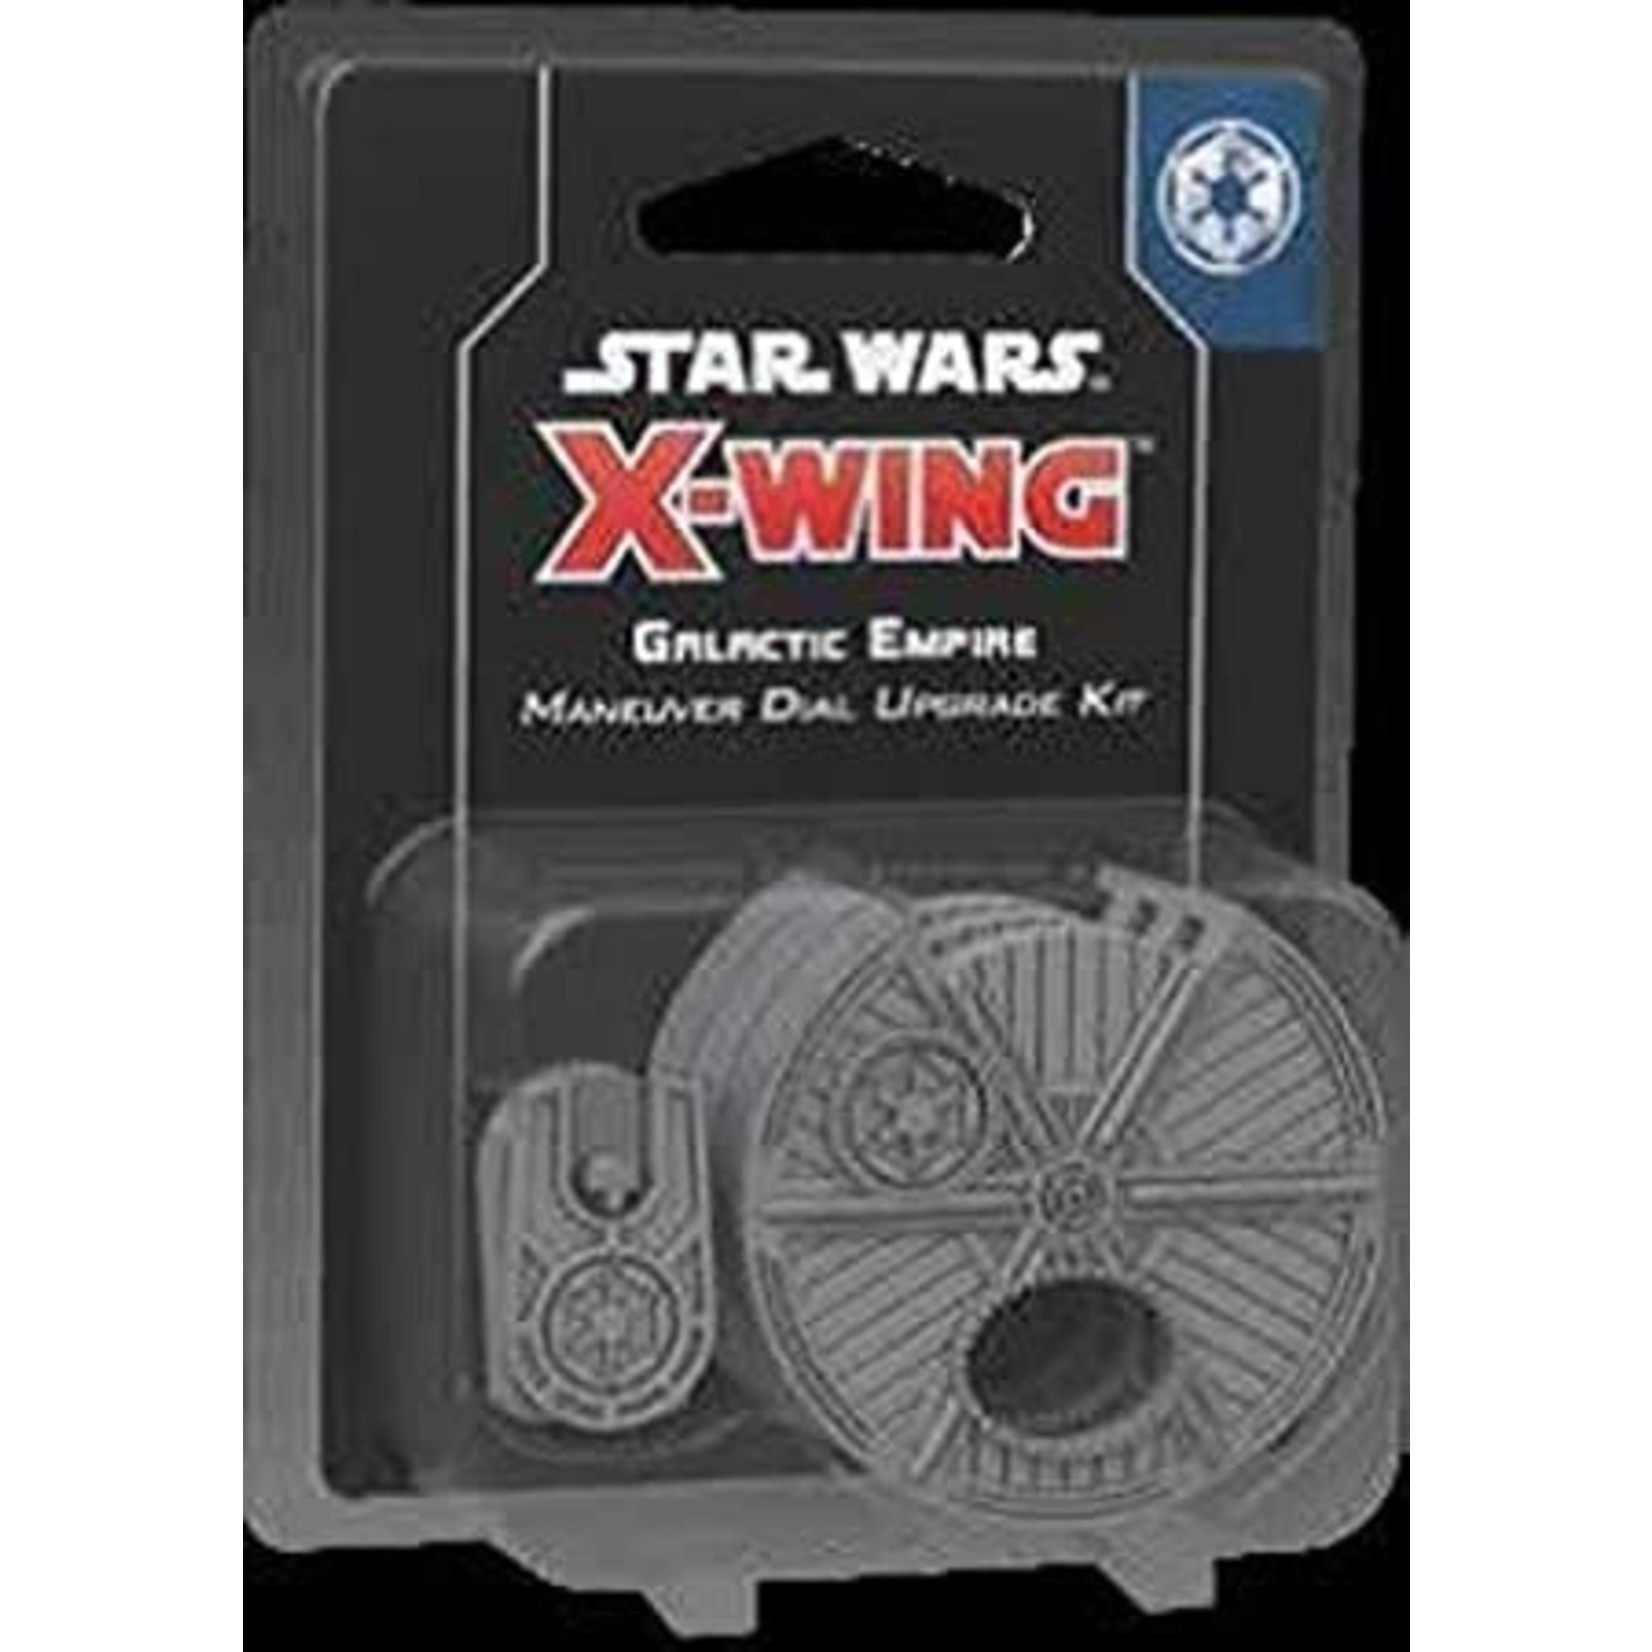 Star Wars X-Wing 2e: Galactic Empire Manuever Dial